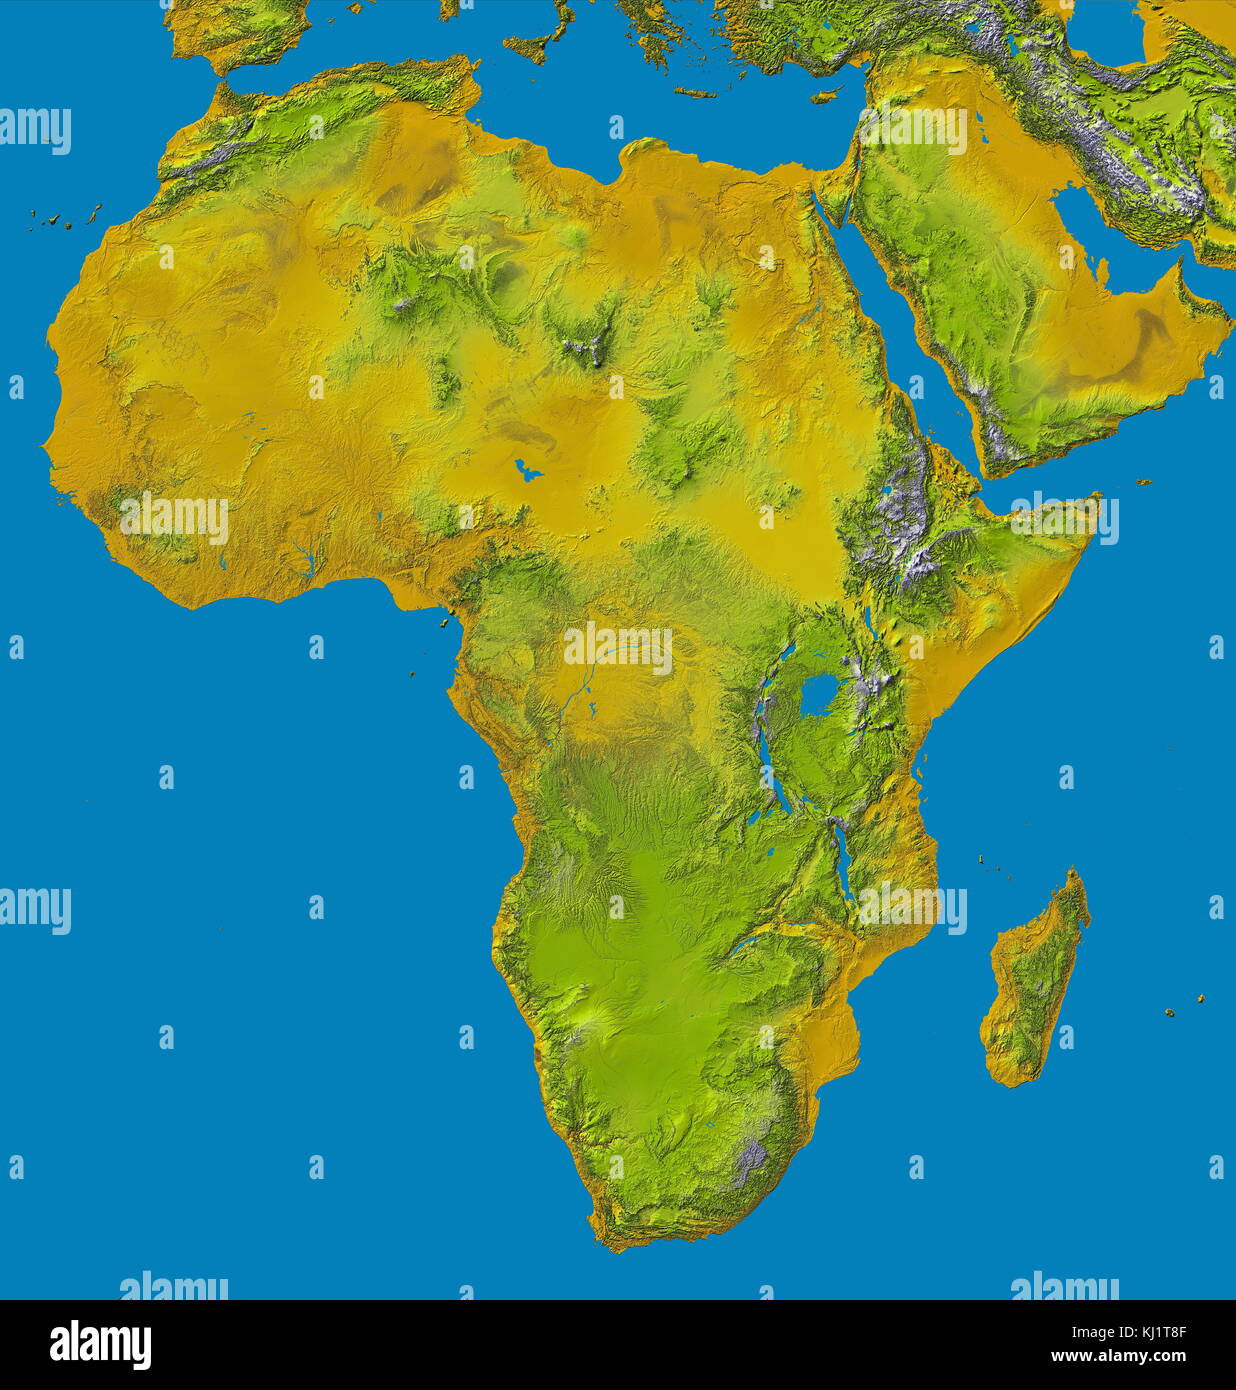 relief image of Africa by the Shuttle Radar Topography Mission (SRTM). This release in 2000, includes data for all of the continent, plus the island of Madagascar and the Arabian Peninsula. The central latitudes of Africa is dominated by the Great Rift Valley, extending from Lake Nyasa to the Red Sea. To the west lies the Congo Basin. Most of the southern part of the continent rests on a concave plateau comprising the Kalahari basin. color-coding is directly related to topographic height, with brown and yellow at the lower elevations, rising through green, to white at the highest elevations. B Stock Photo